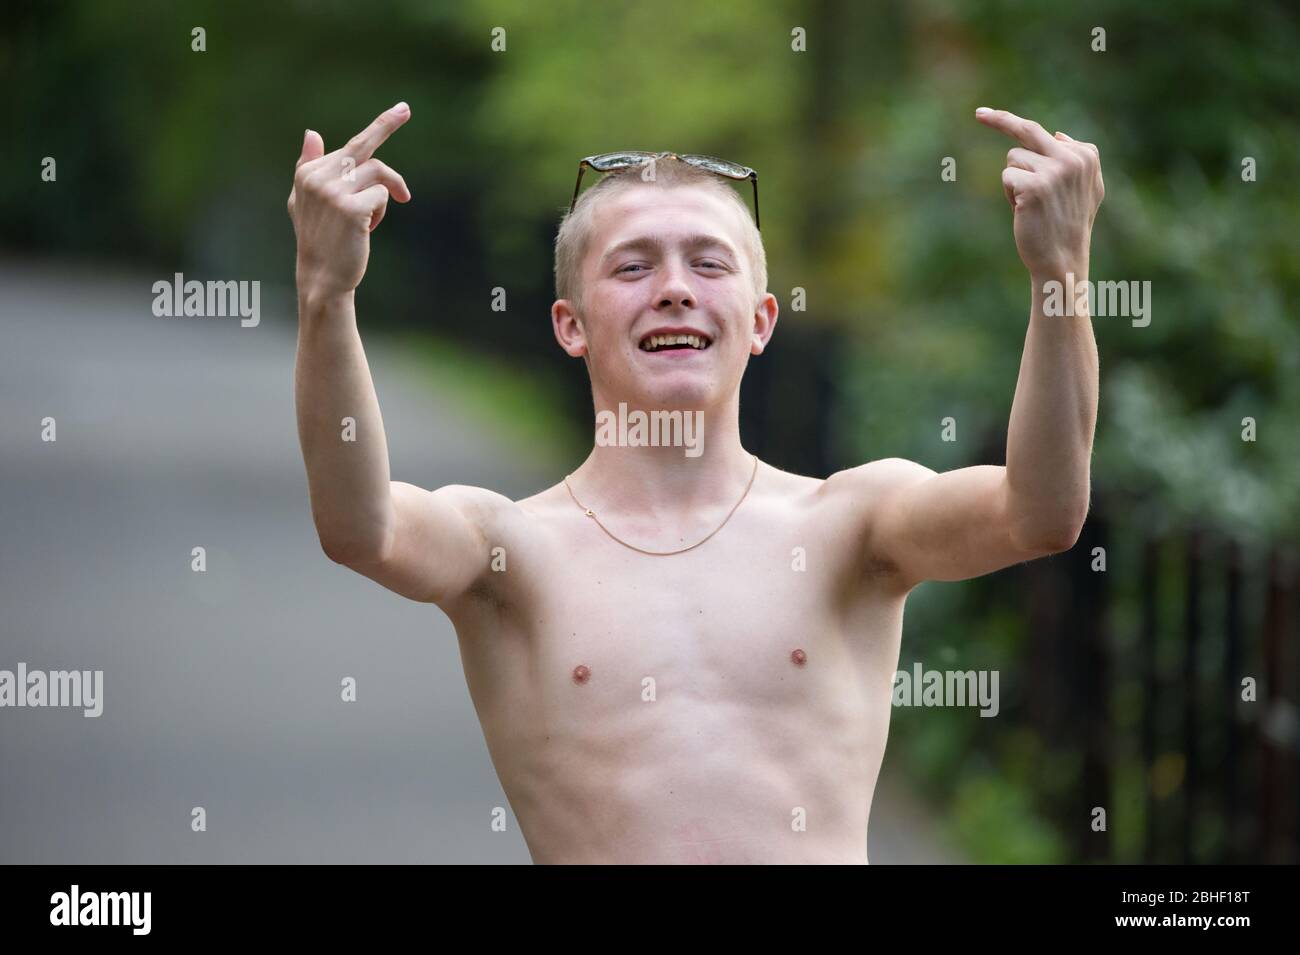 Glasgow, UK. 25th Apr, 2020. Pictured: Keiran Macginley, enjoying the sunshine in the park and giving a friendly gesture to the camera. As the saying goes in Glasgow if the sun is out it's “taps aff” weather. Scenes from the first weekend of the extended lockdown from KelvinGrove Park in Glasgow's West End during a very hot and sunny Saturday. Credit: Colin Fisher/Alamy Live News Stock Photo